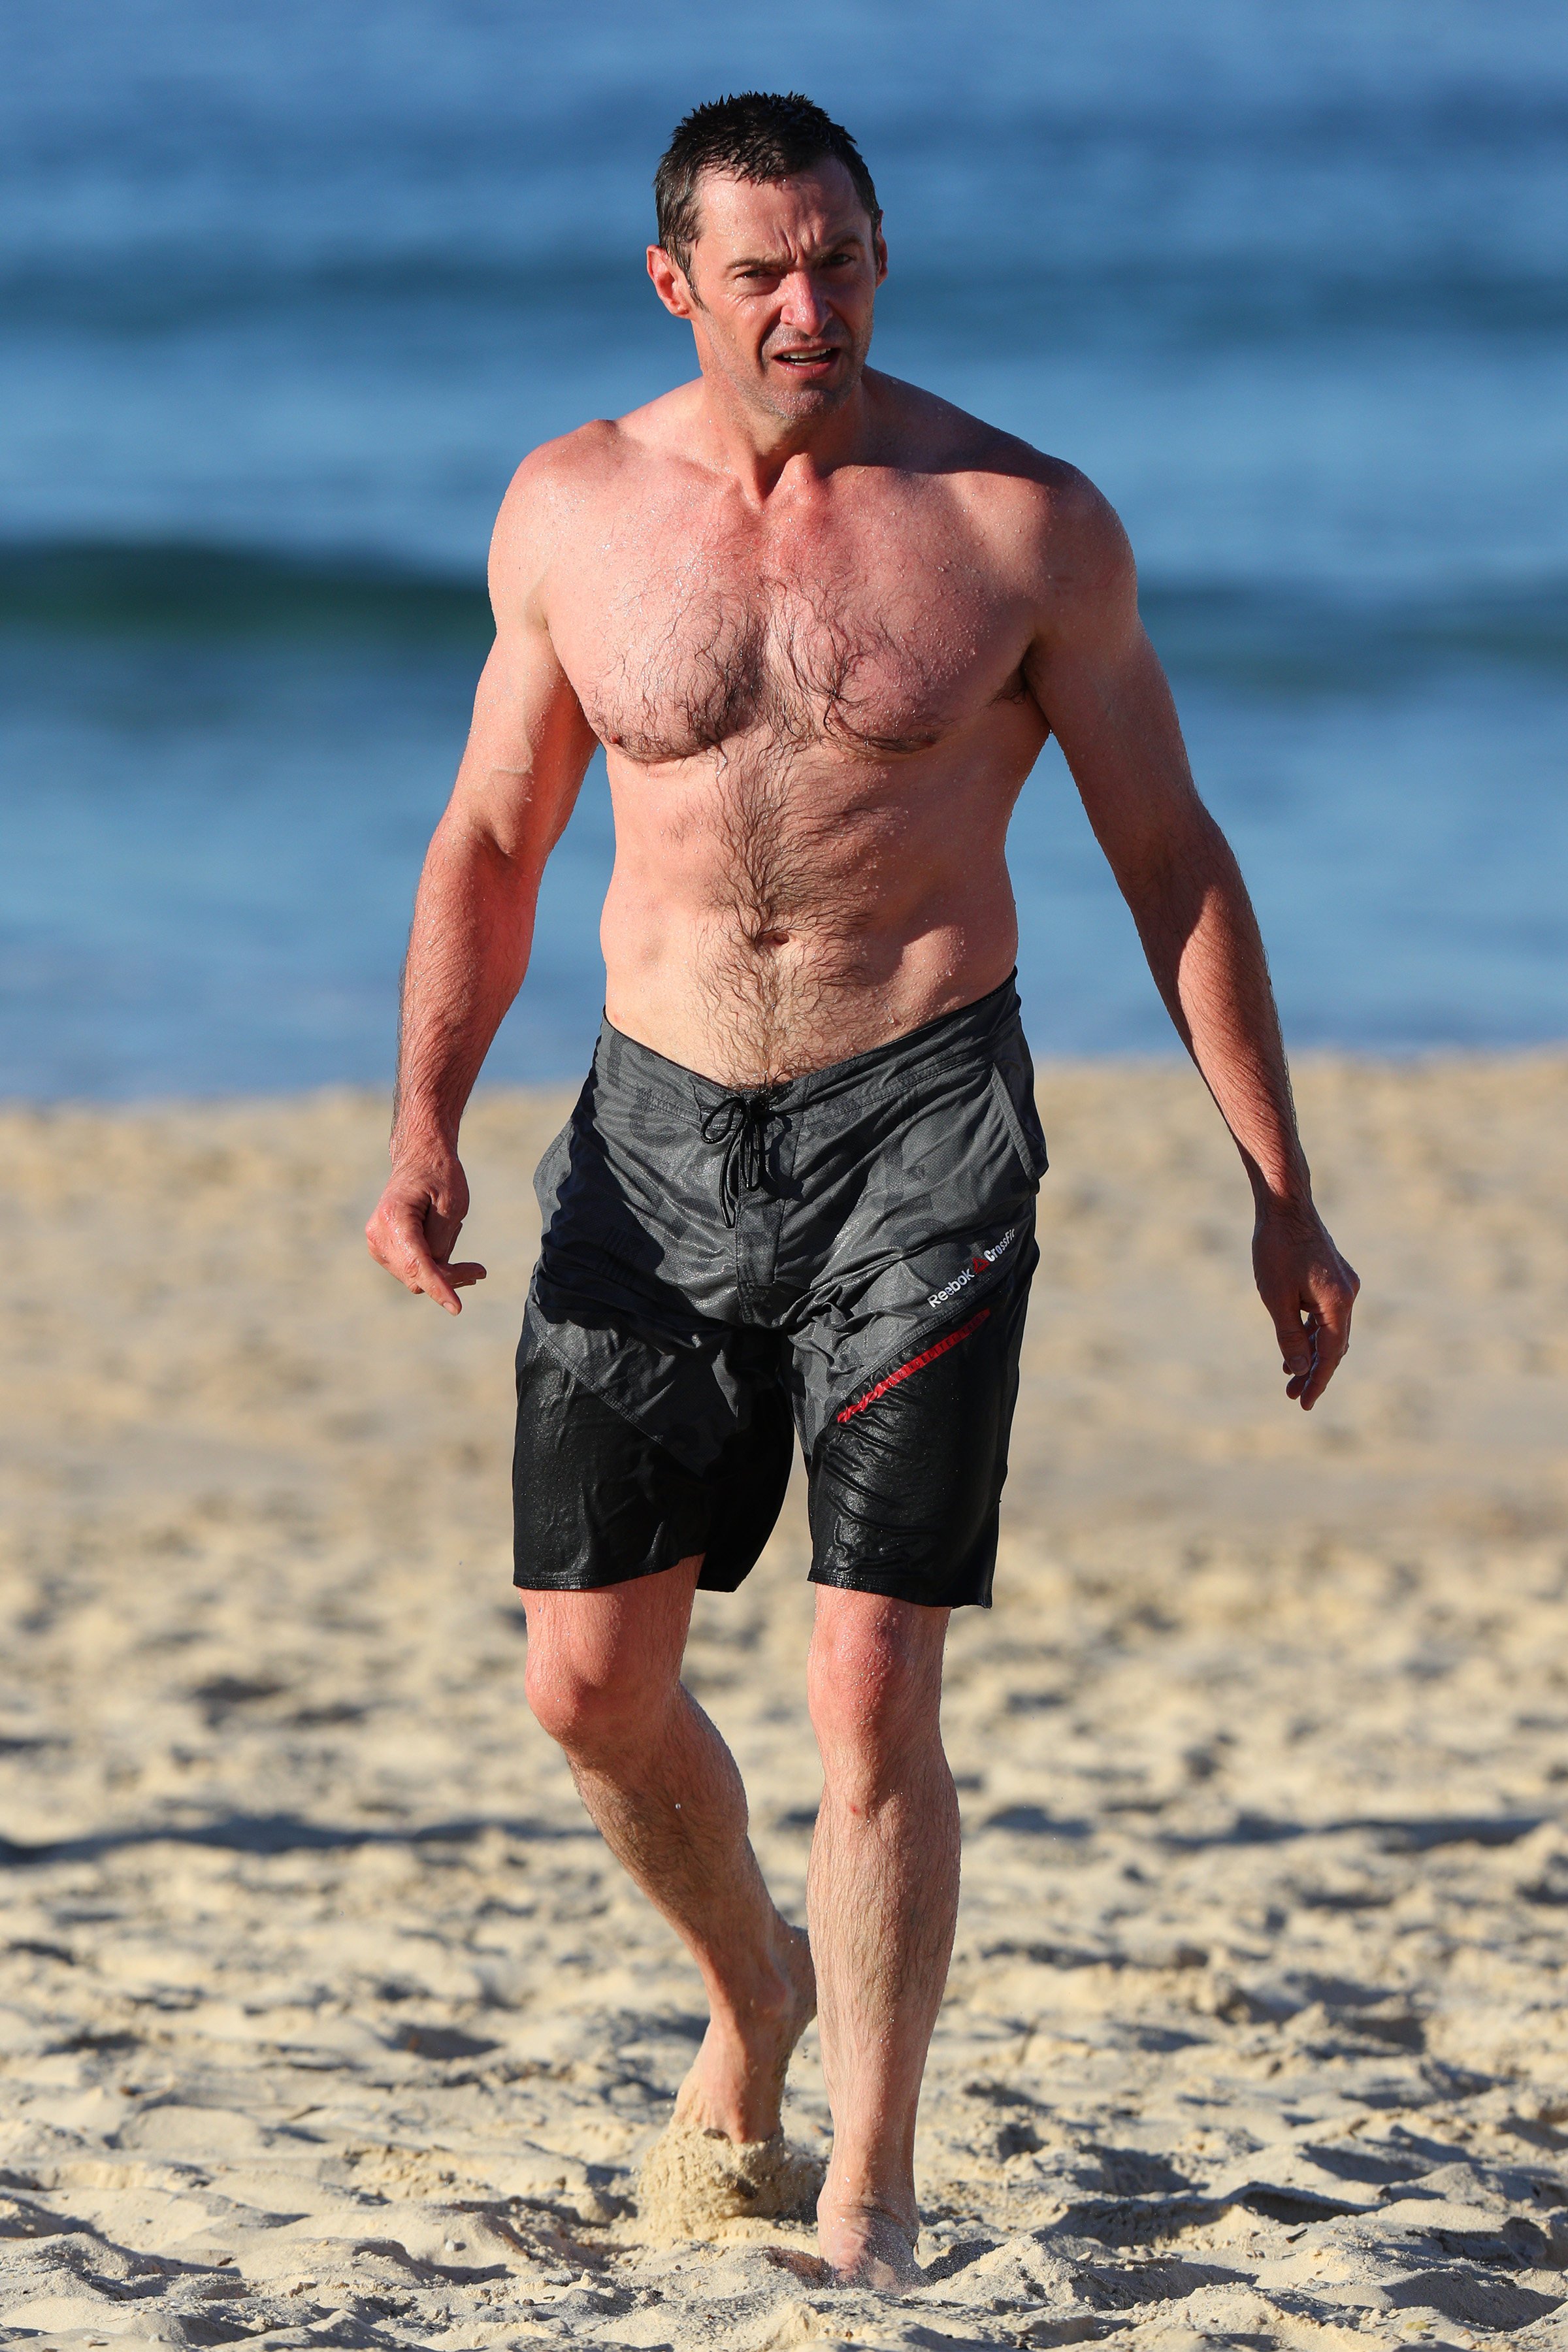 To play Wolverine in the X-Men films, Australian actor Hugh Jackman has had to bulk up and get shredded more than once in the past quarter-century. How does he do it? Photo: Getty Images